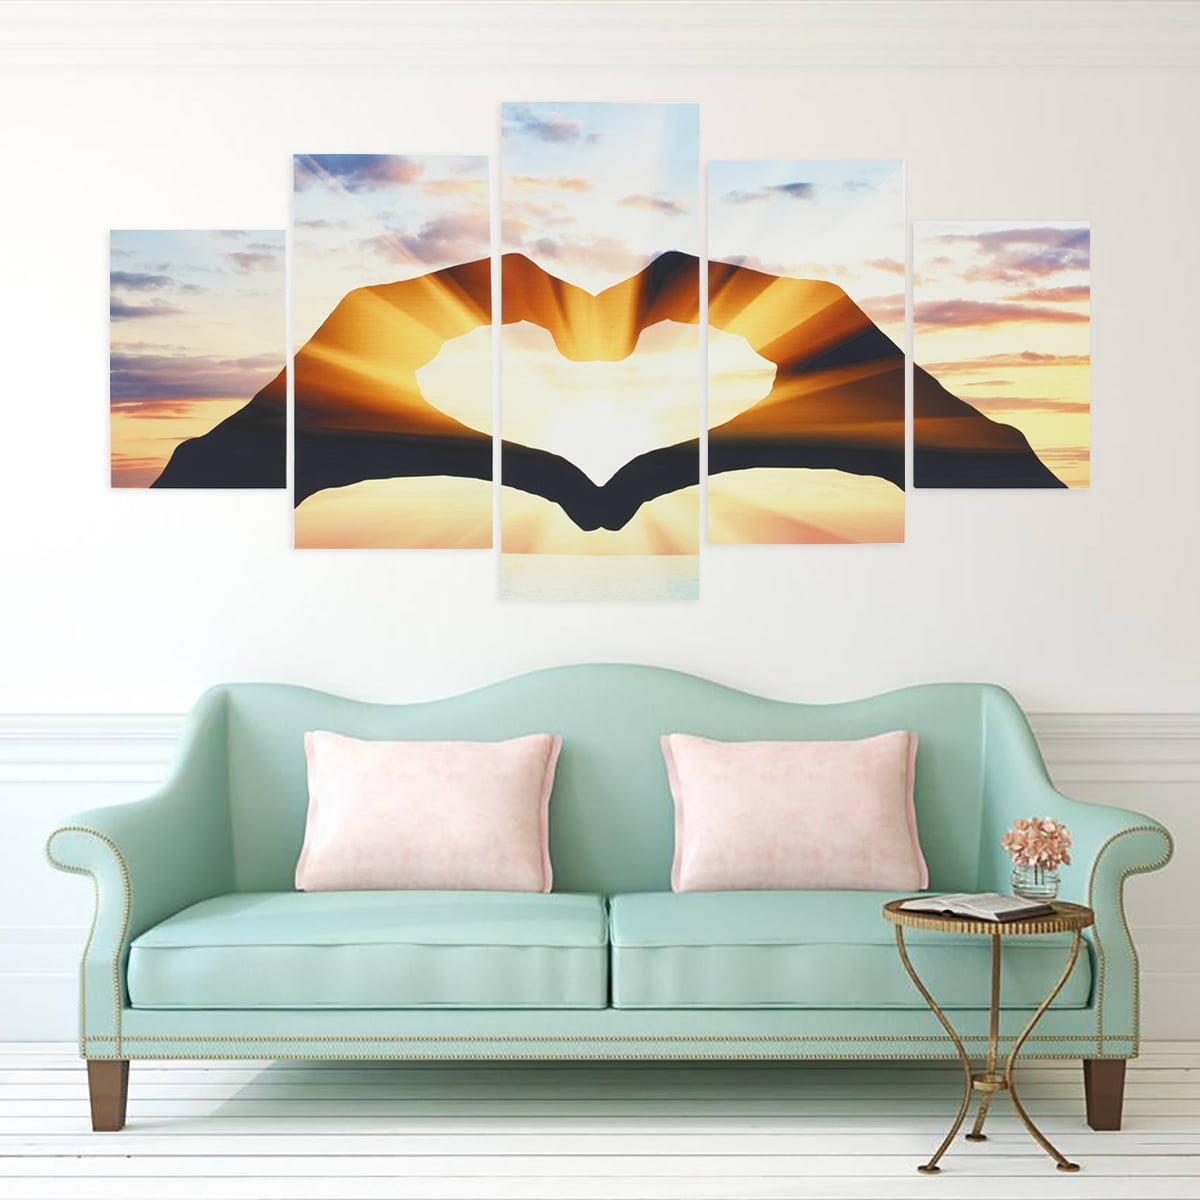 5pcs Unframed Painting Canvas Print Wall Picture Home Room Decoration Ornament